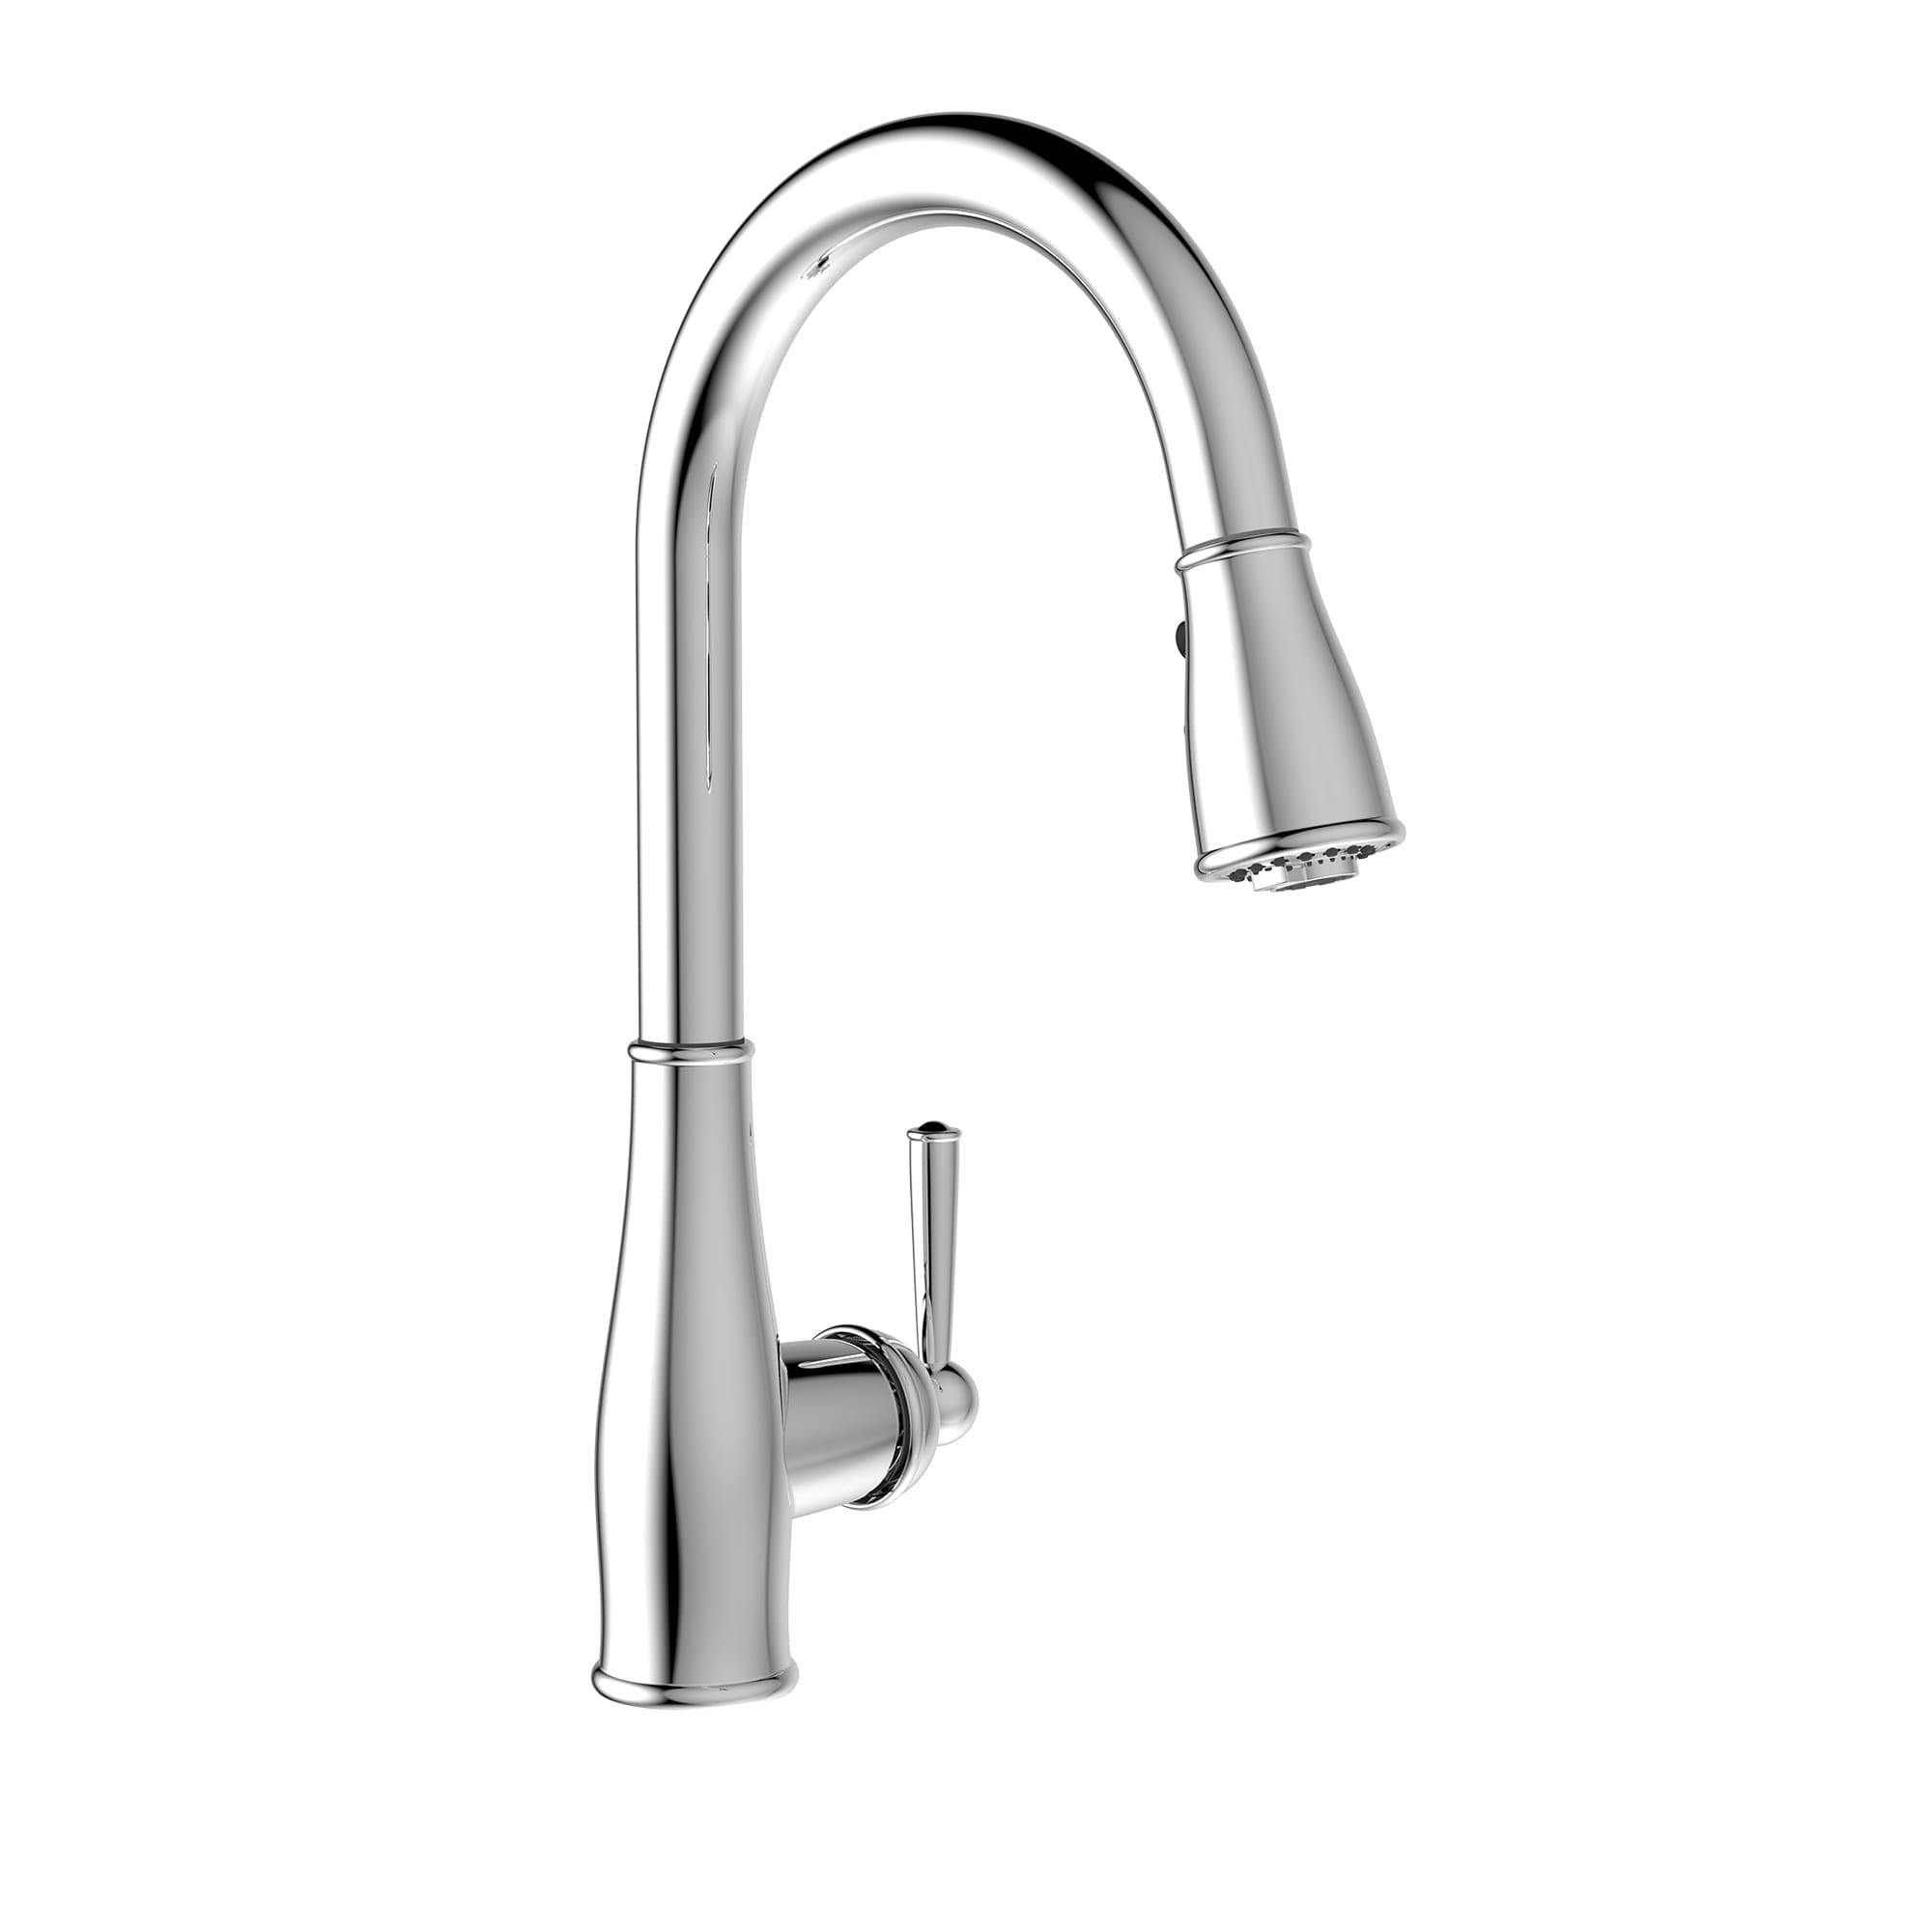 Kitchen Sink Faucet With Swivel Pull Down Spout Featuring Quick Lock Technology Blanger Upt